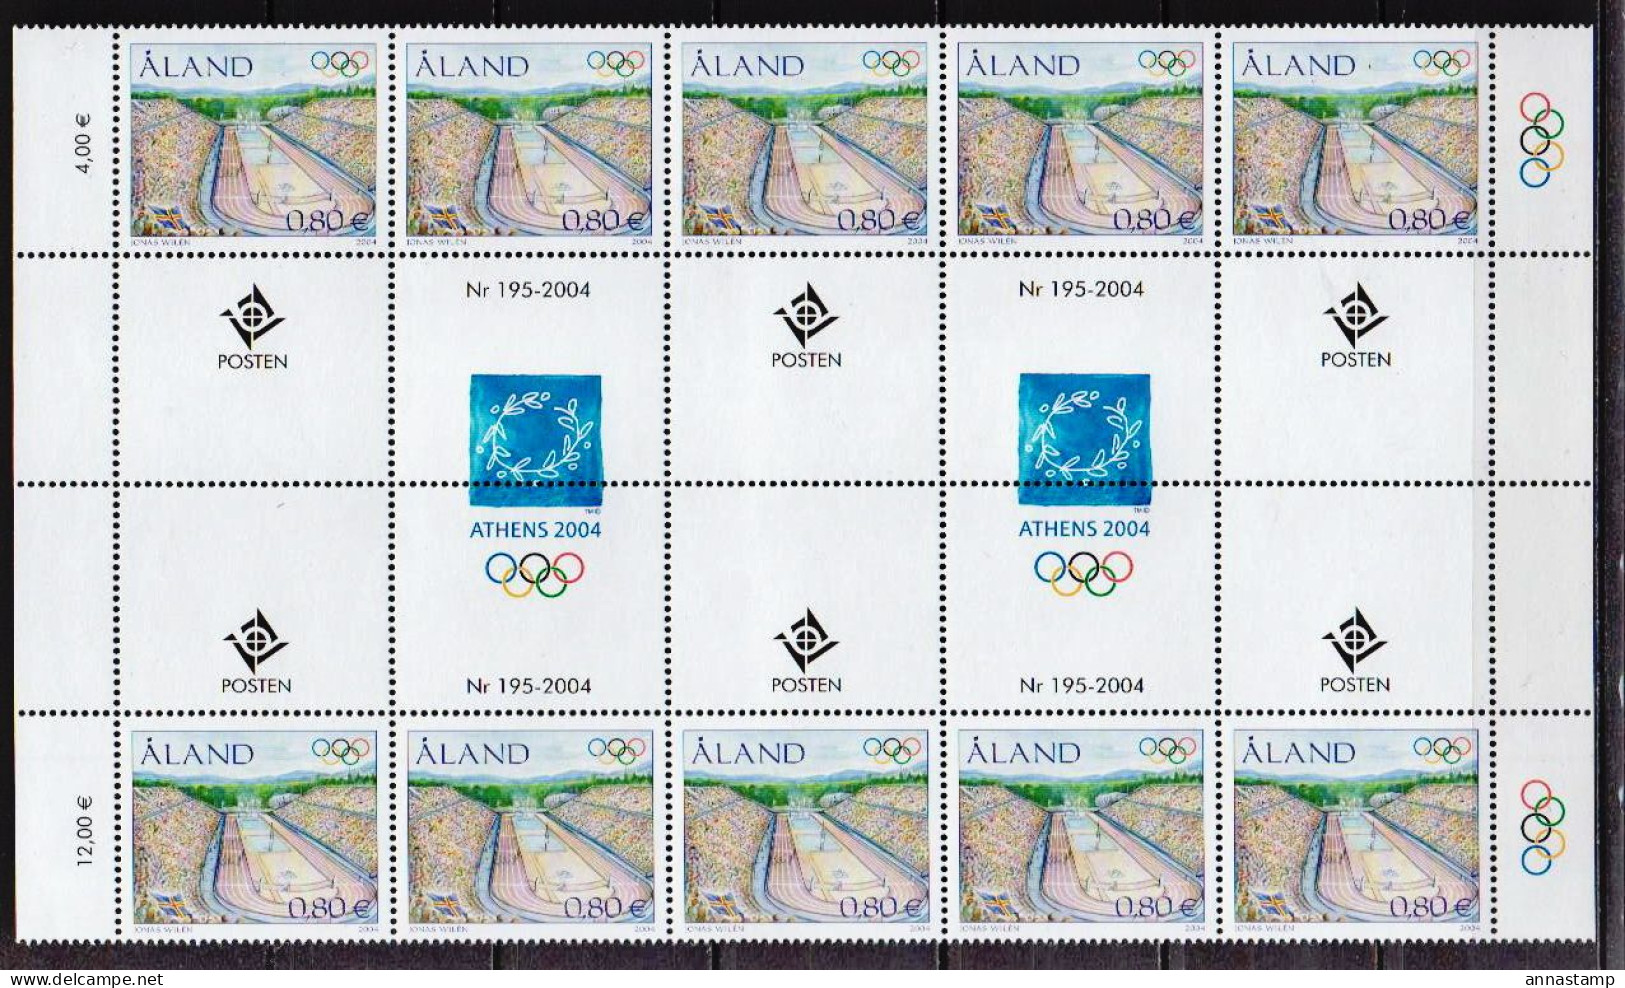 Aland MNH Stamp In A Sheet Of 10 Stamps - Summer 2004: Athens